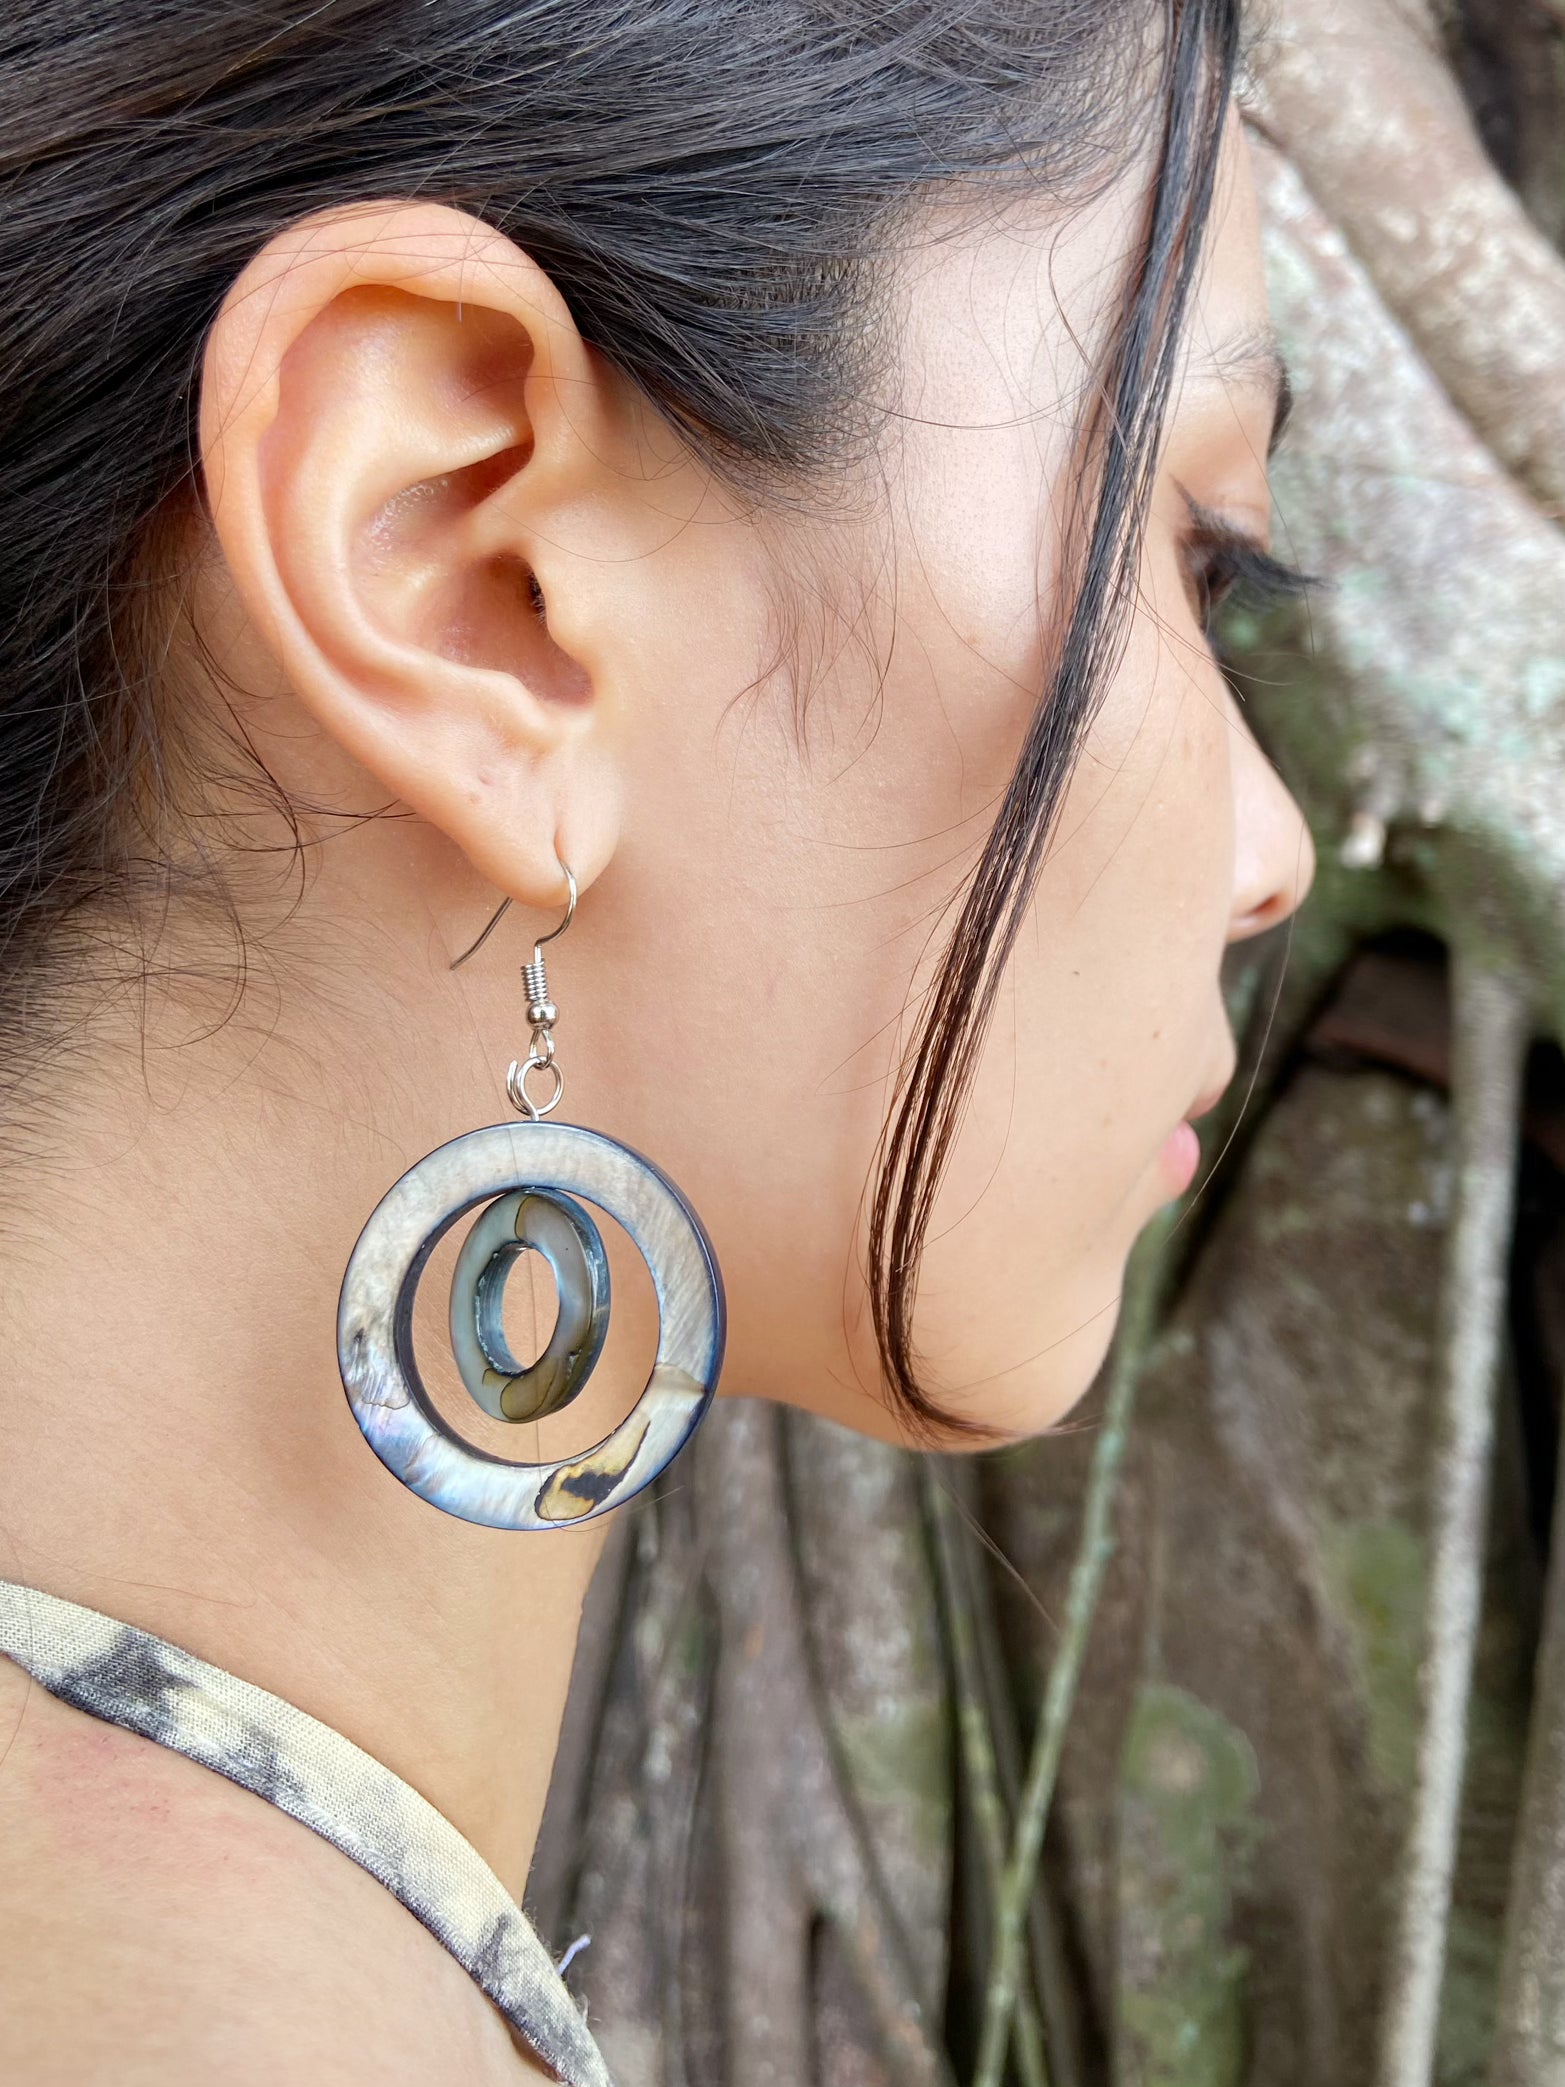 Nacre3, Mother of pearl handcrafted Earrings